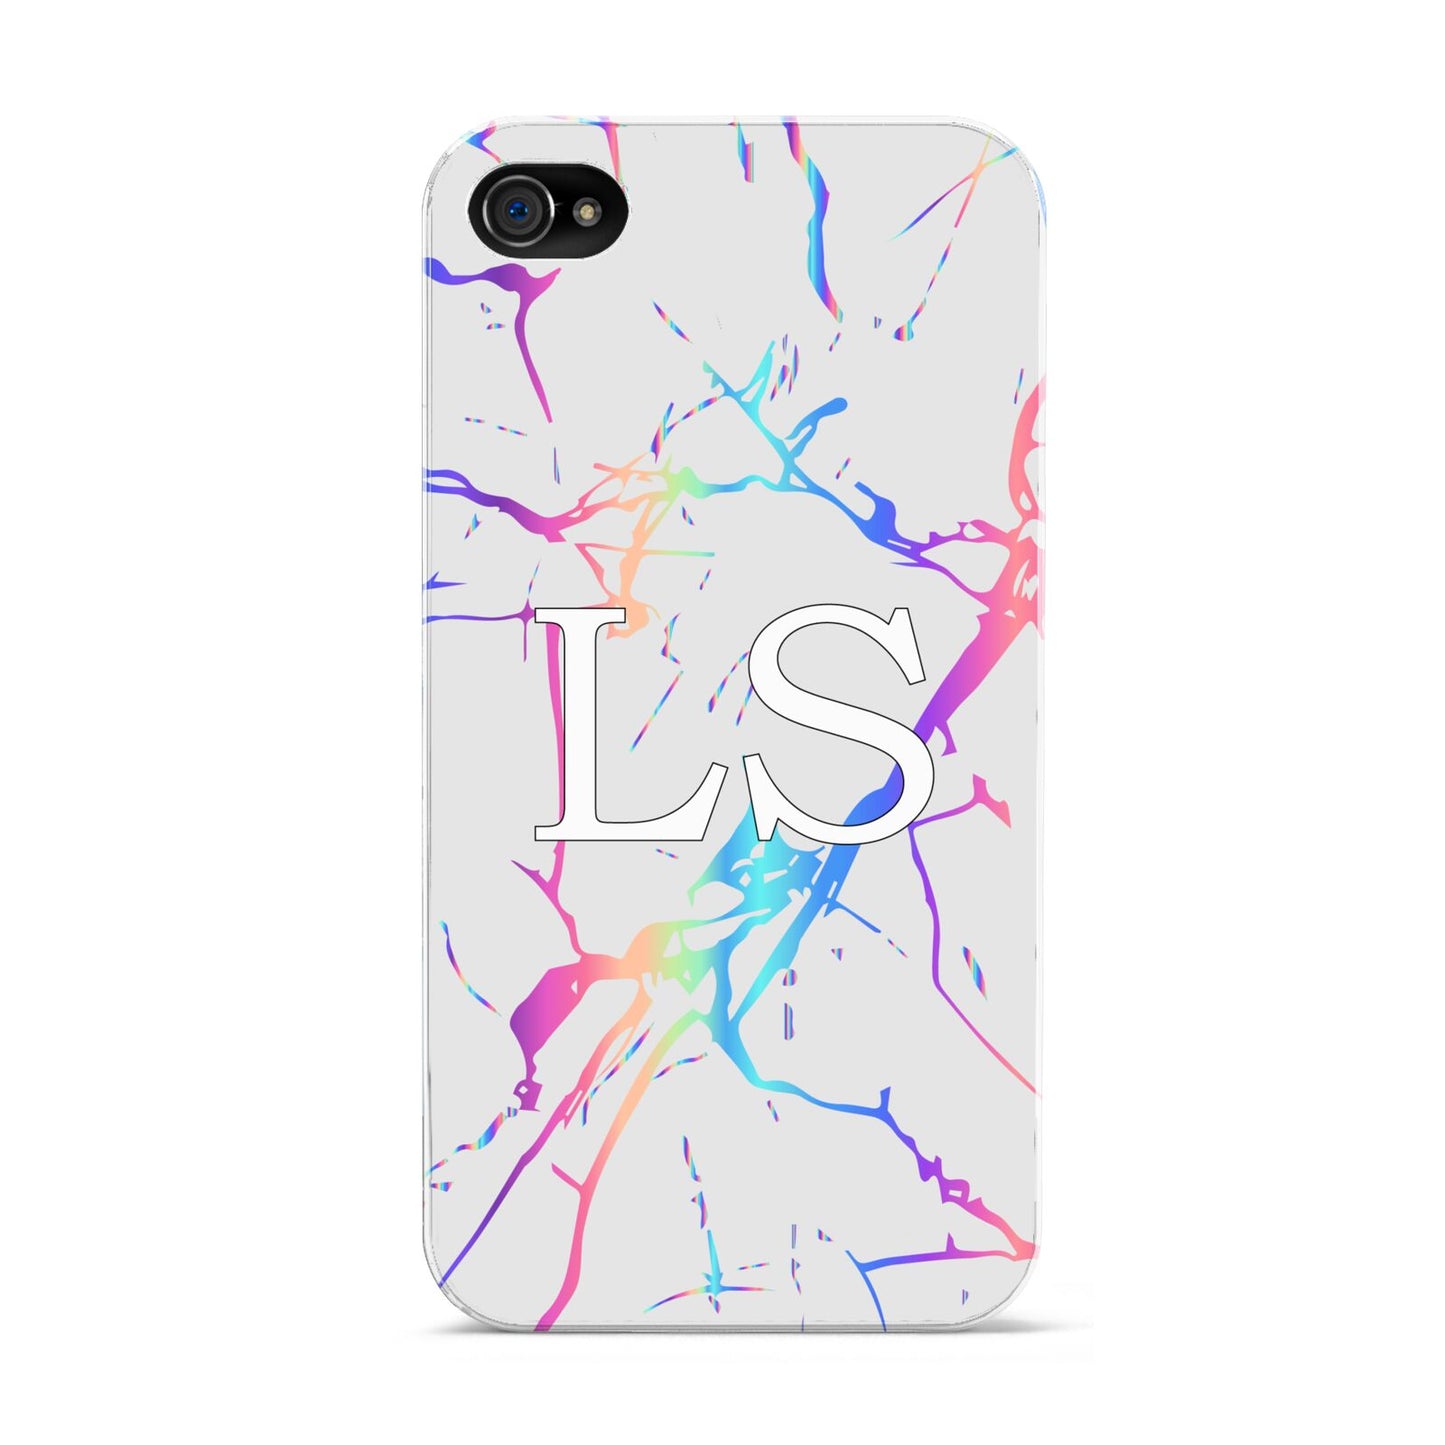 Personalised White Holographic Marble Initials Apple iPhone 4s Case